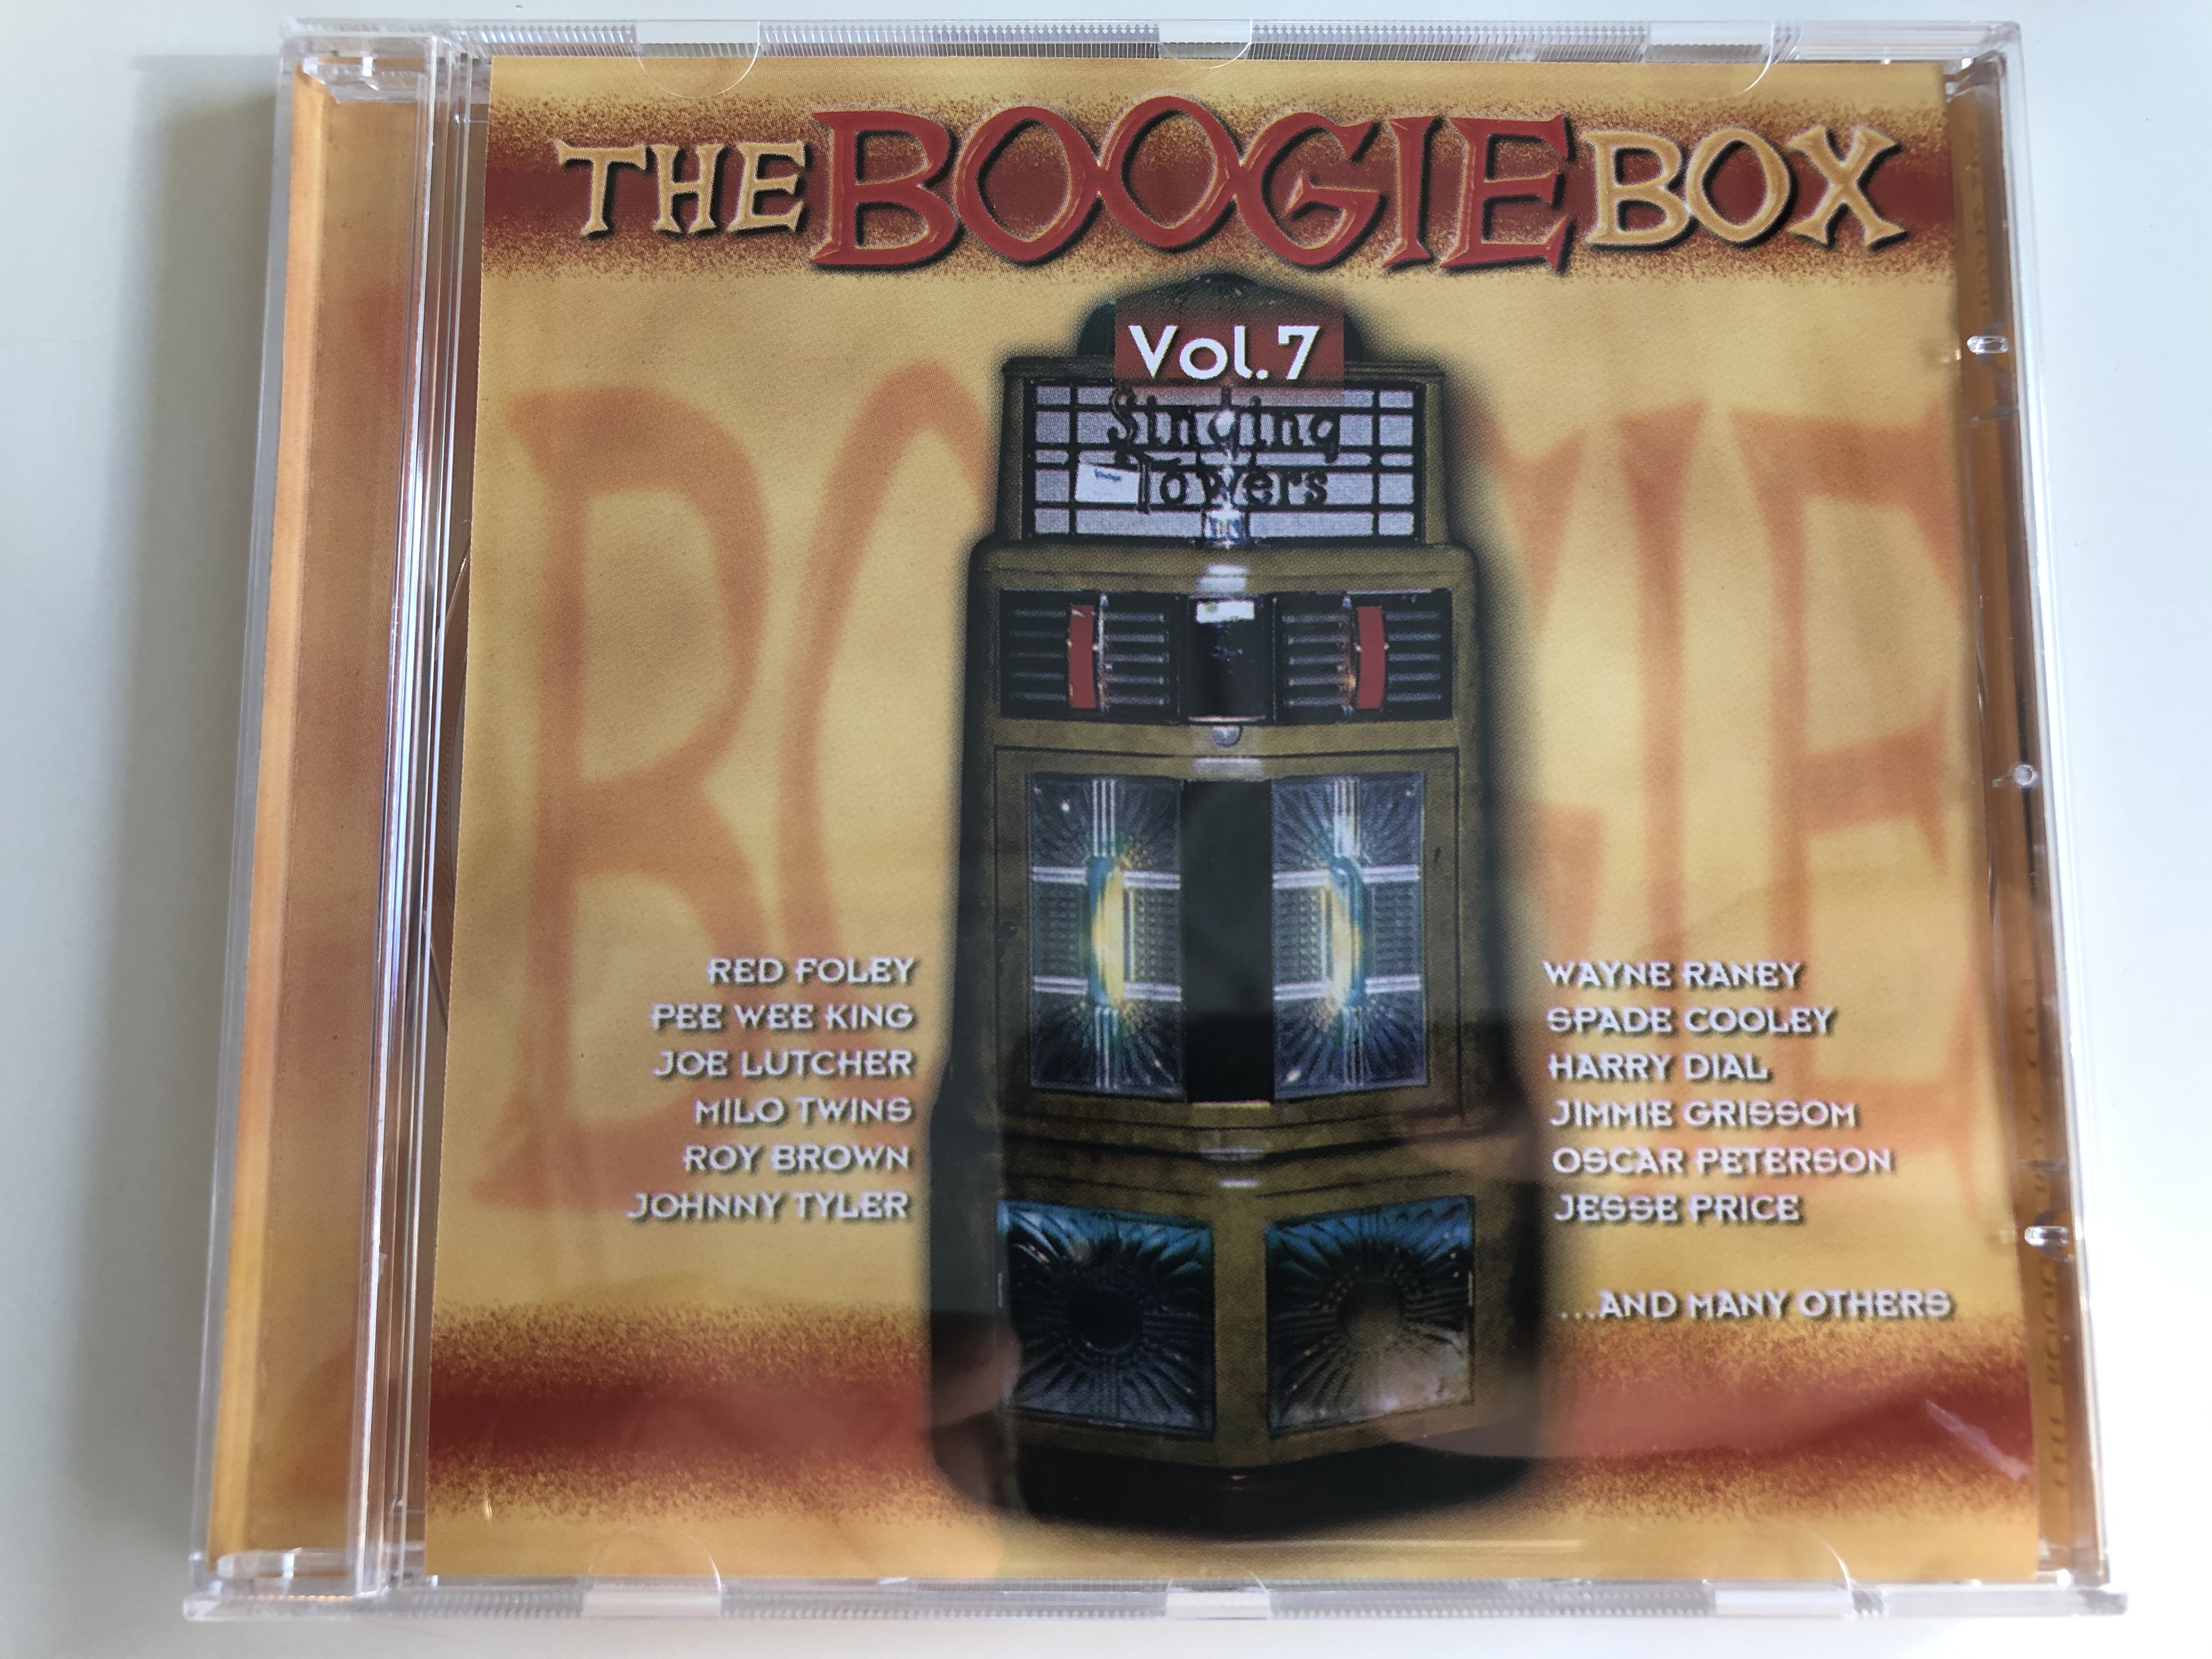 the-boogie-box-vol.-7-red-foley-pee-wee-king-joe-lutcher-milo-twins-roy-brown-johnny-tyler-wayne-raney-spade-cooley-harry-dial-jimmie-grissom-oscar-peterson-jesse-price-and-many-others-tim-cz-audi-1-.jpg